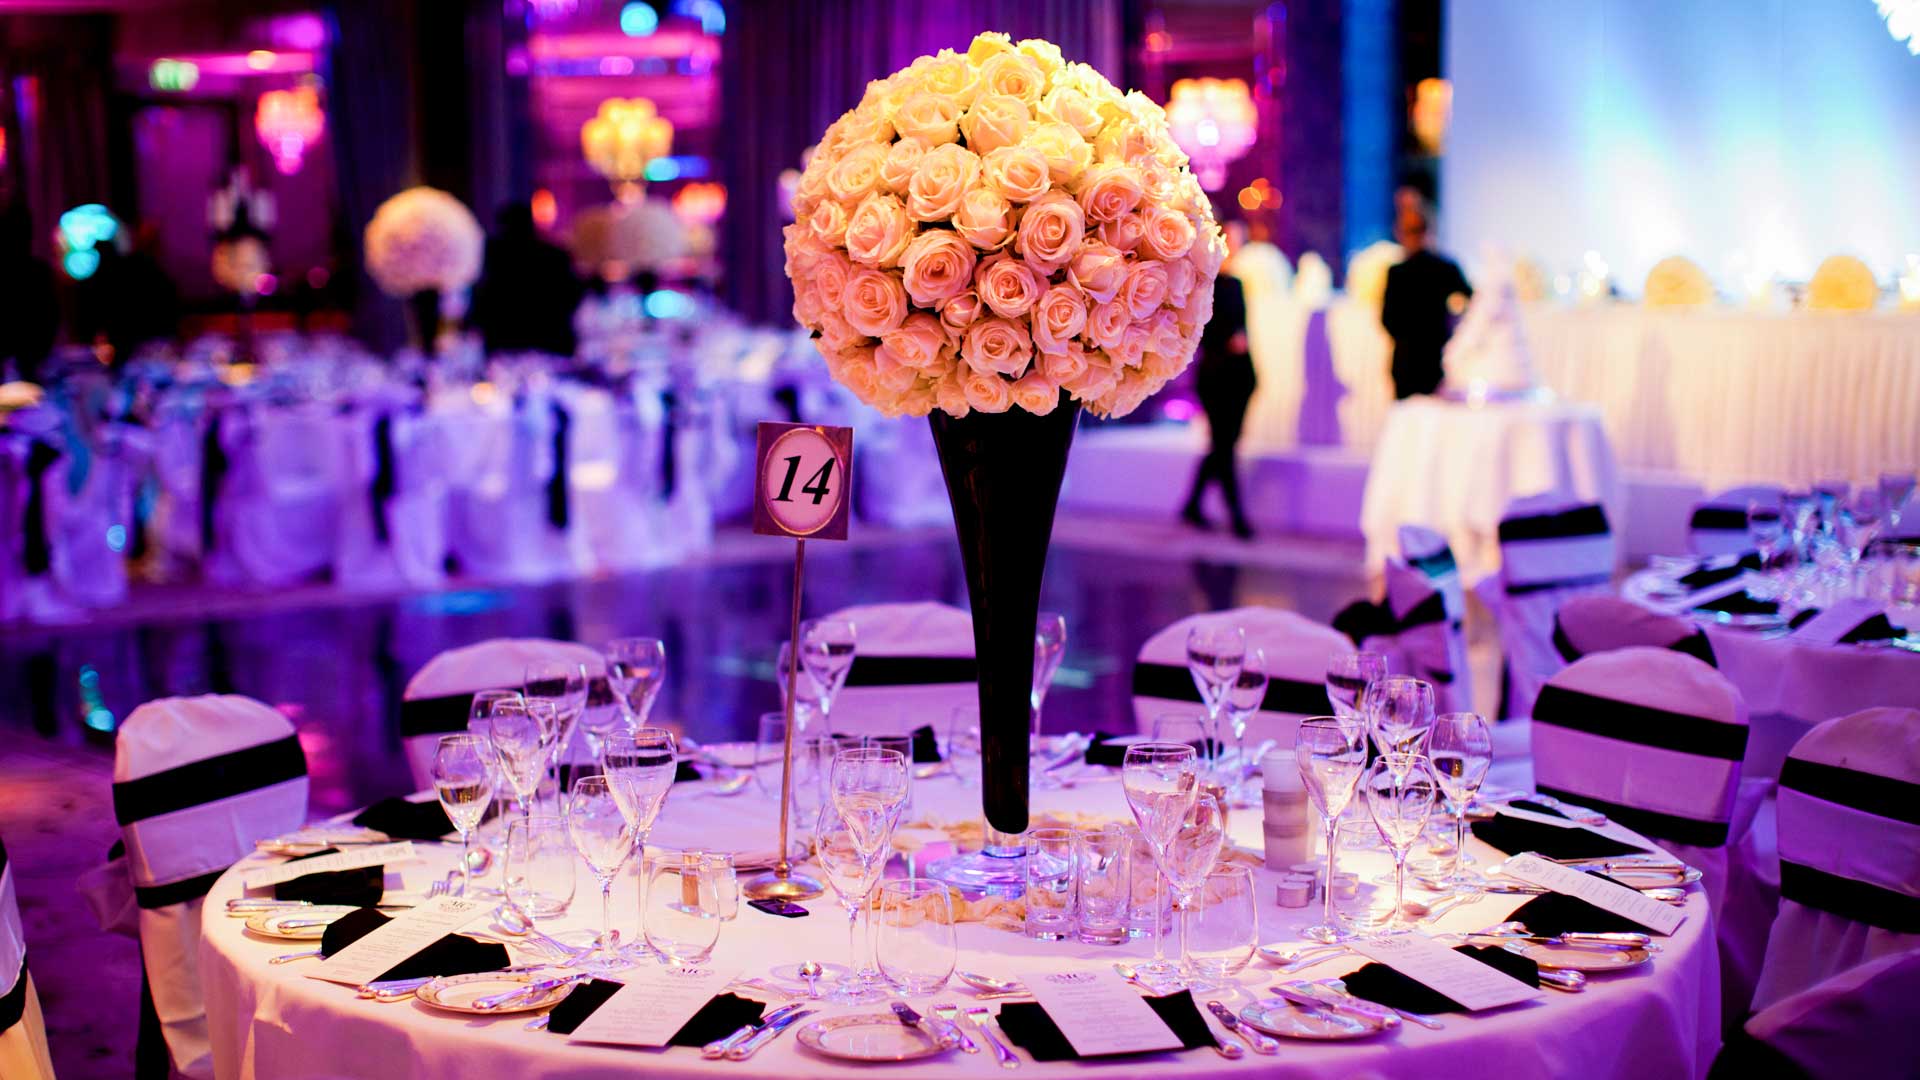 Event management in Australia and the benefits it has